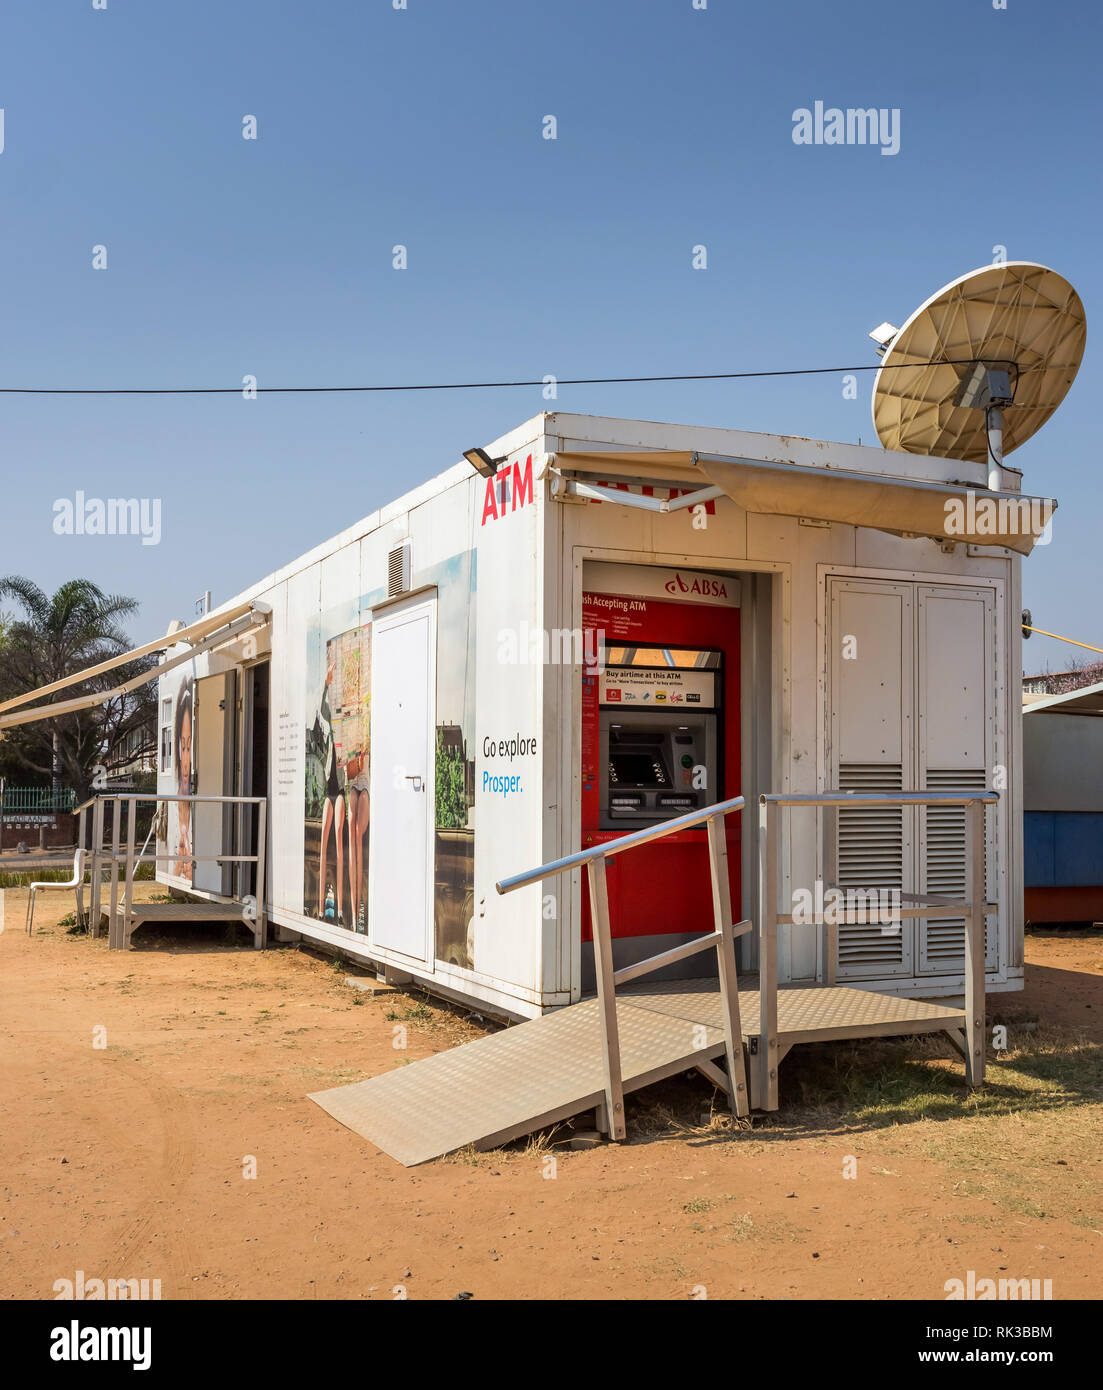 Pretoria, South Africa, 22 August - 2018: Shipping container converted into bank. Cash withdrawal machine can be seen on the side of container. Stock Photo